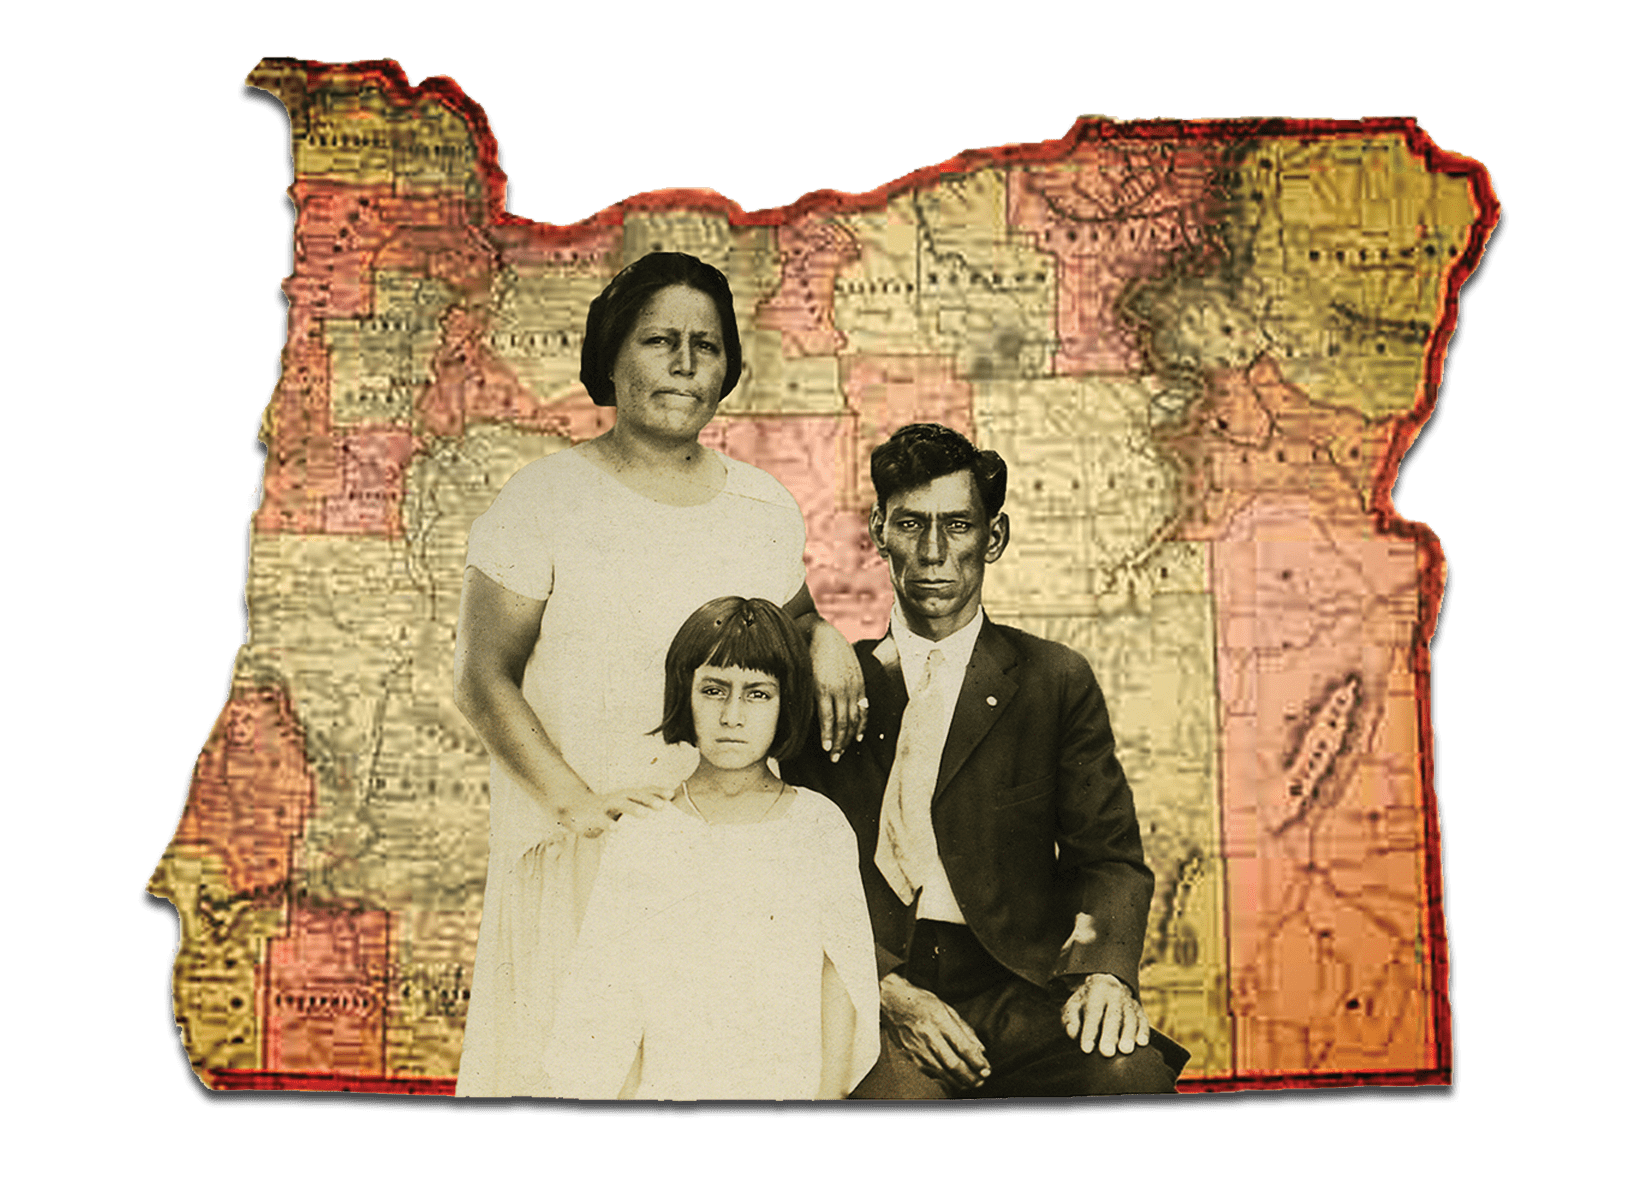 A black and white portrait of a Latino family in 1935 is layered on top of a map of Oregon.